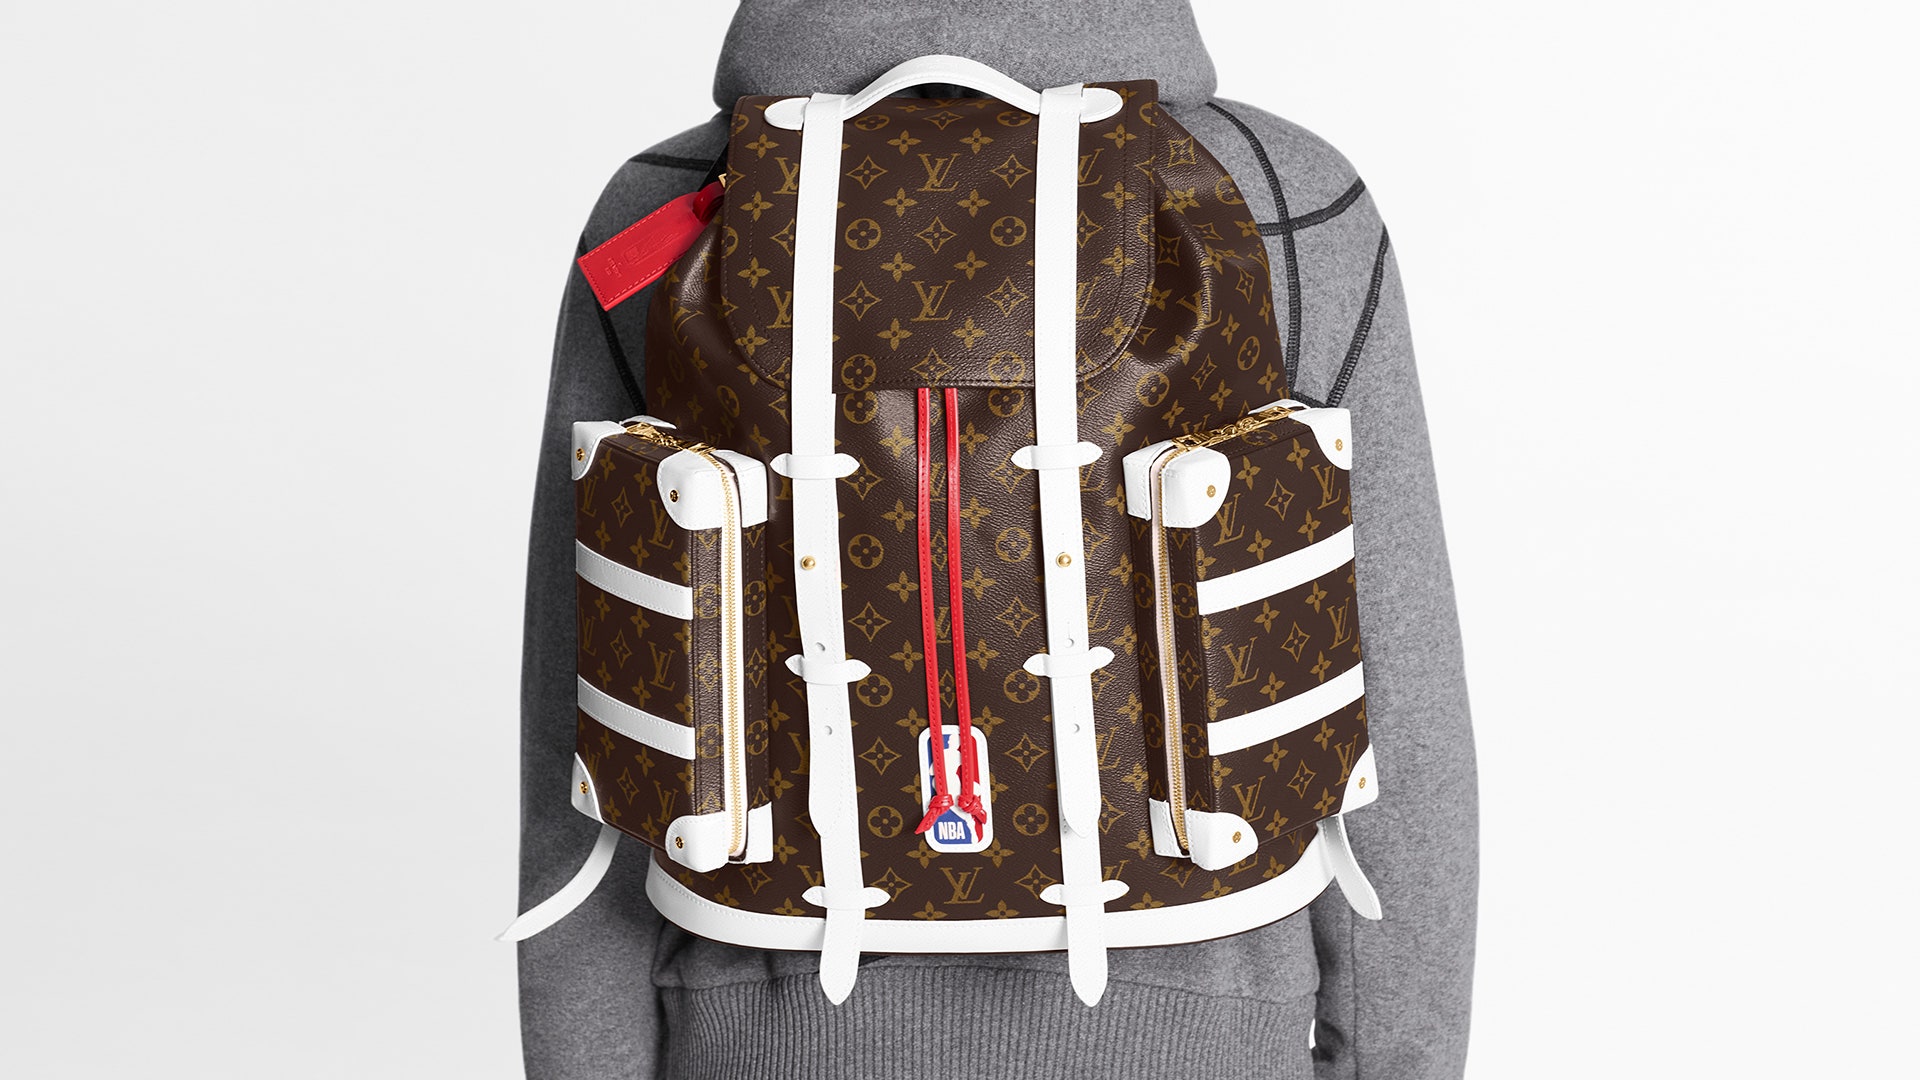 Channel LeBron James with the Louis Vuitton x NBA collection - www.lvbagssale.com